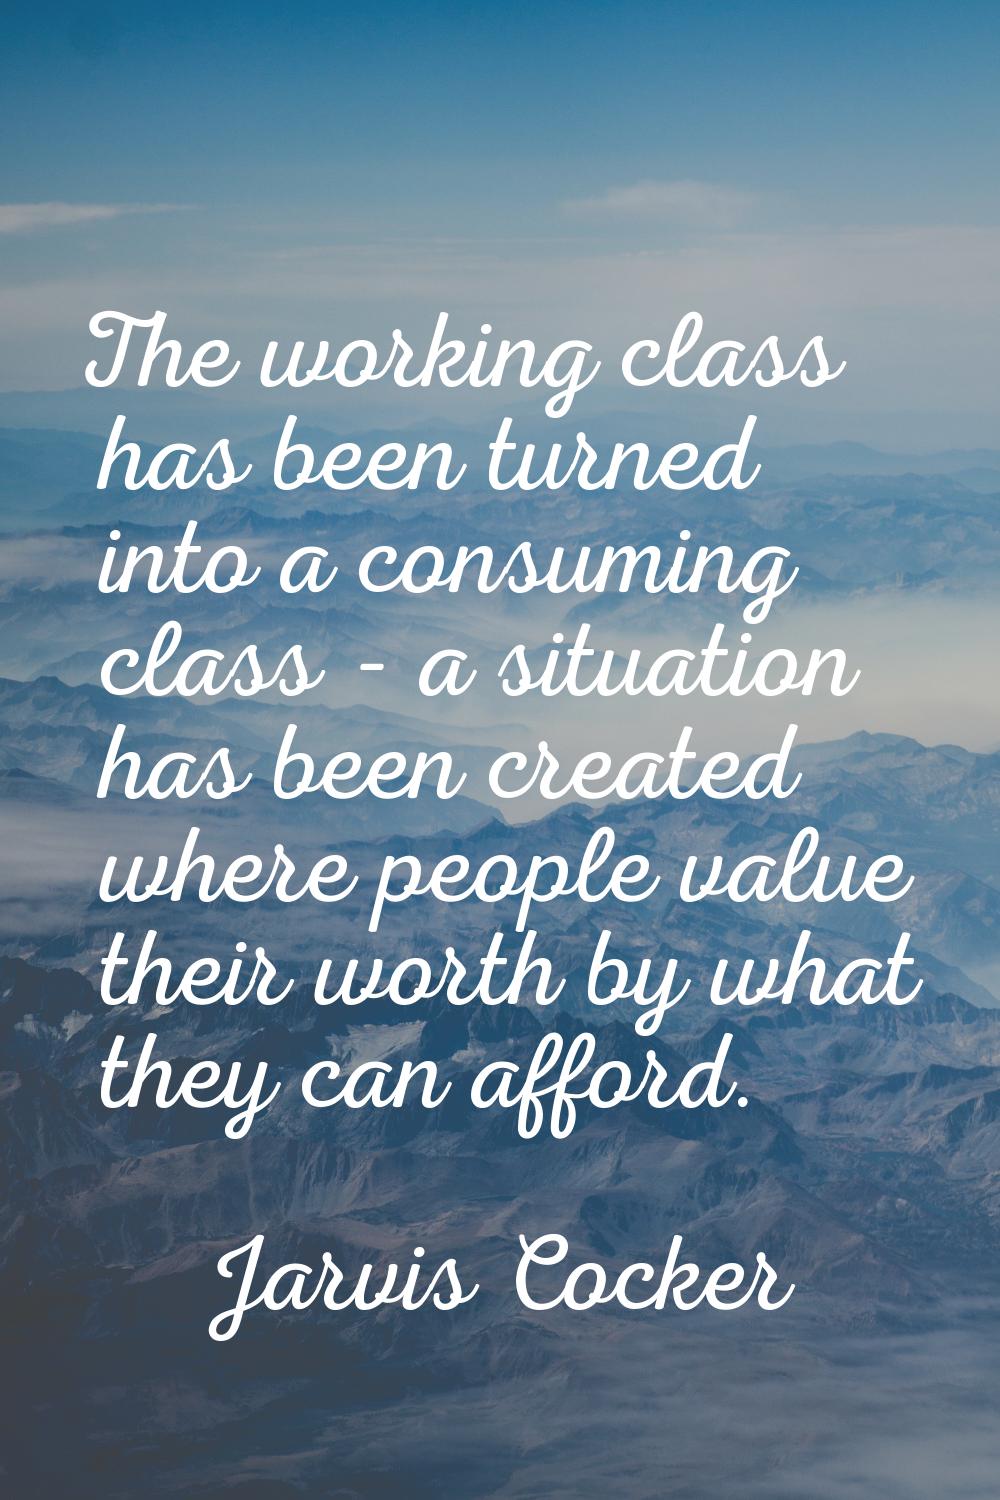 The working class has been turned into a consuming class - a situation has been created where peopl